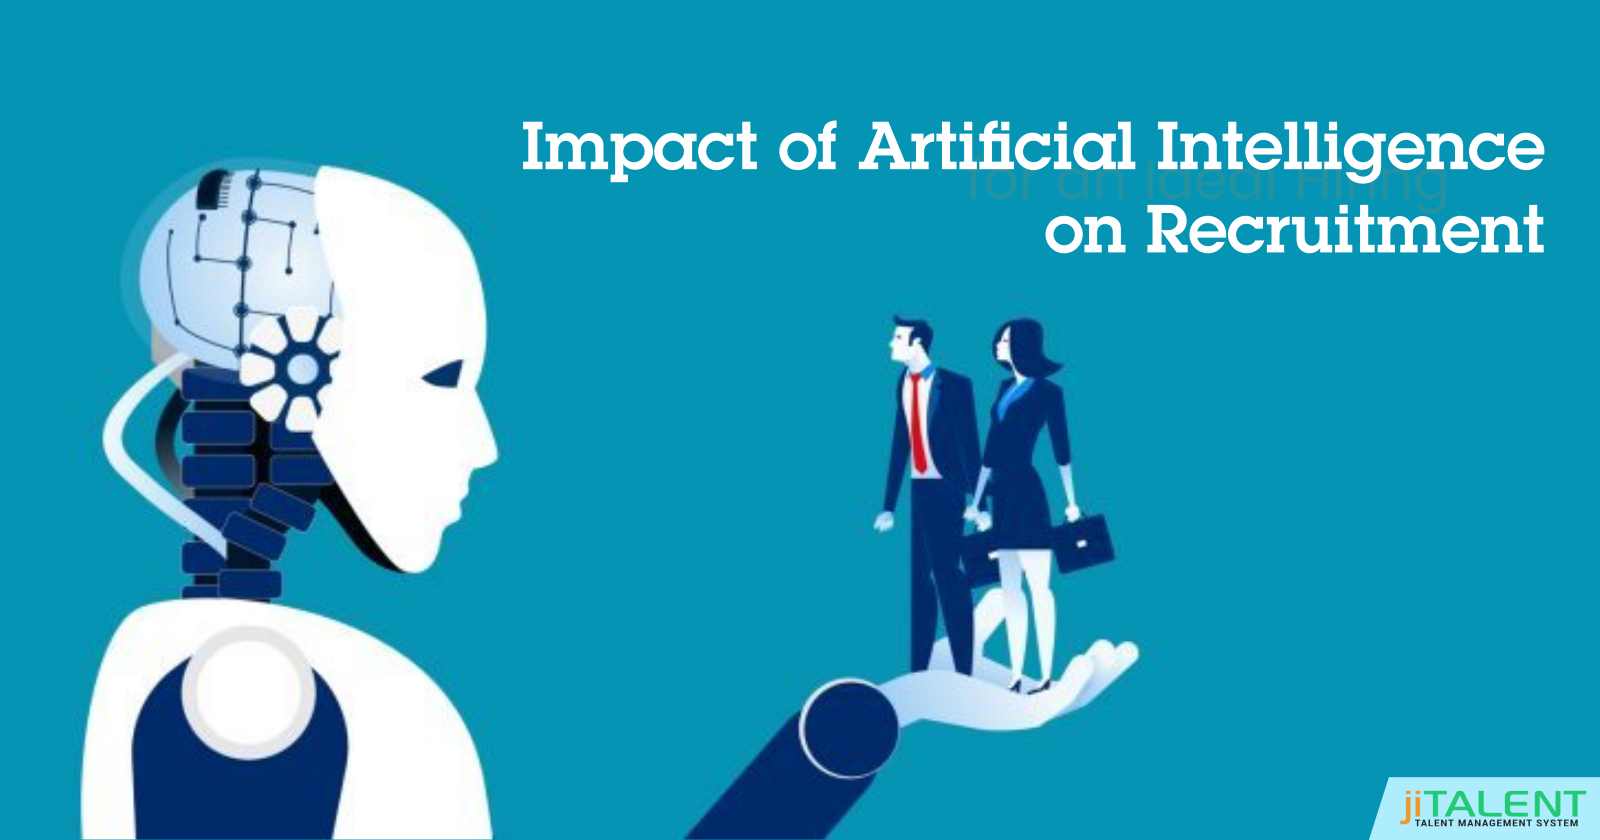 Impact of Artificial Intelligence on Recruitment in the Future